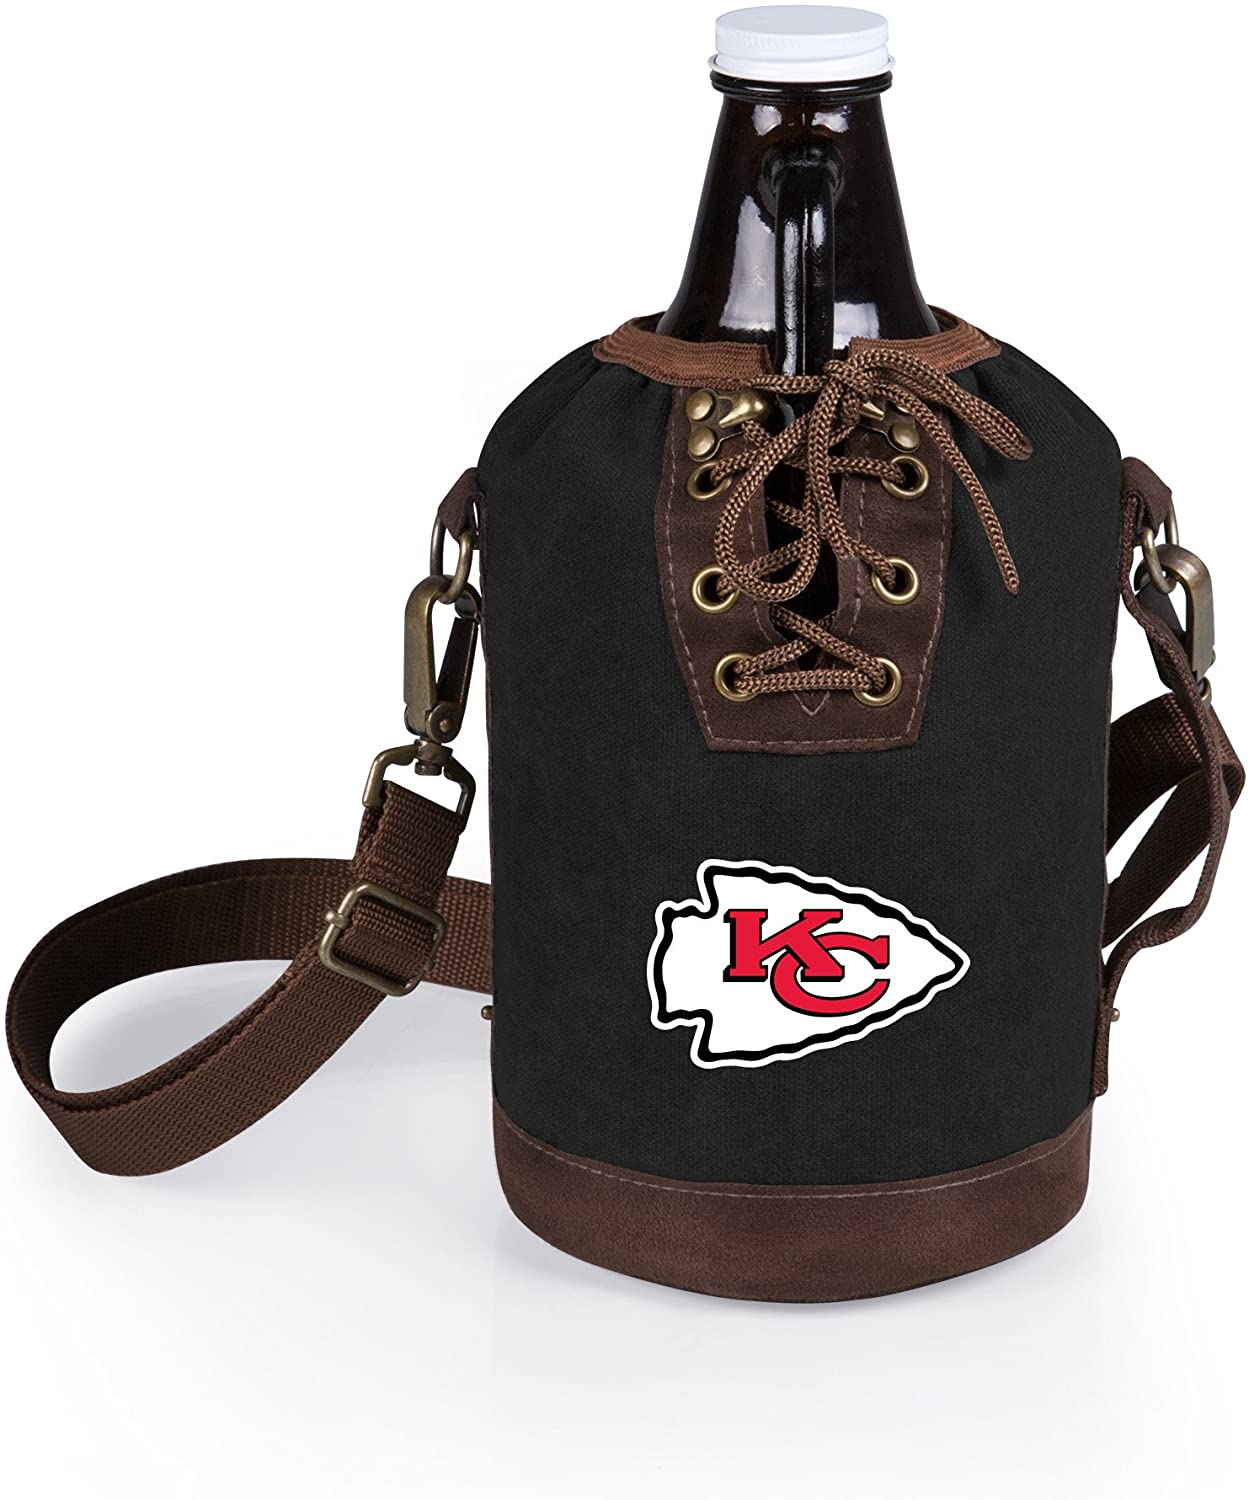 PICNIC TIME NFL Canvas Lace-up Growler Tote with 64 oz Amber Glass Growler